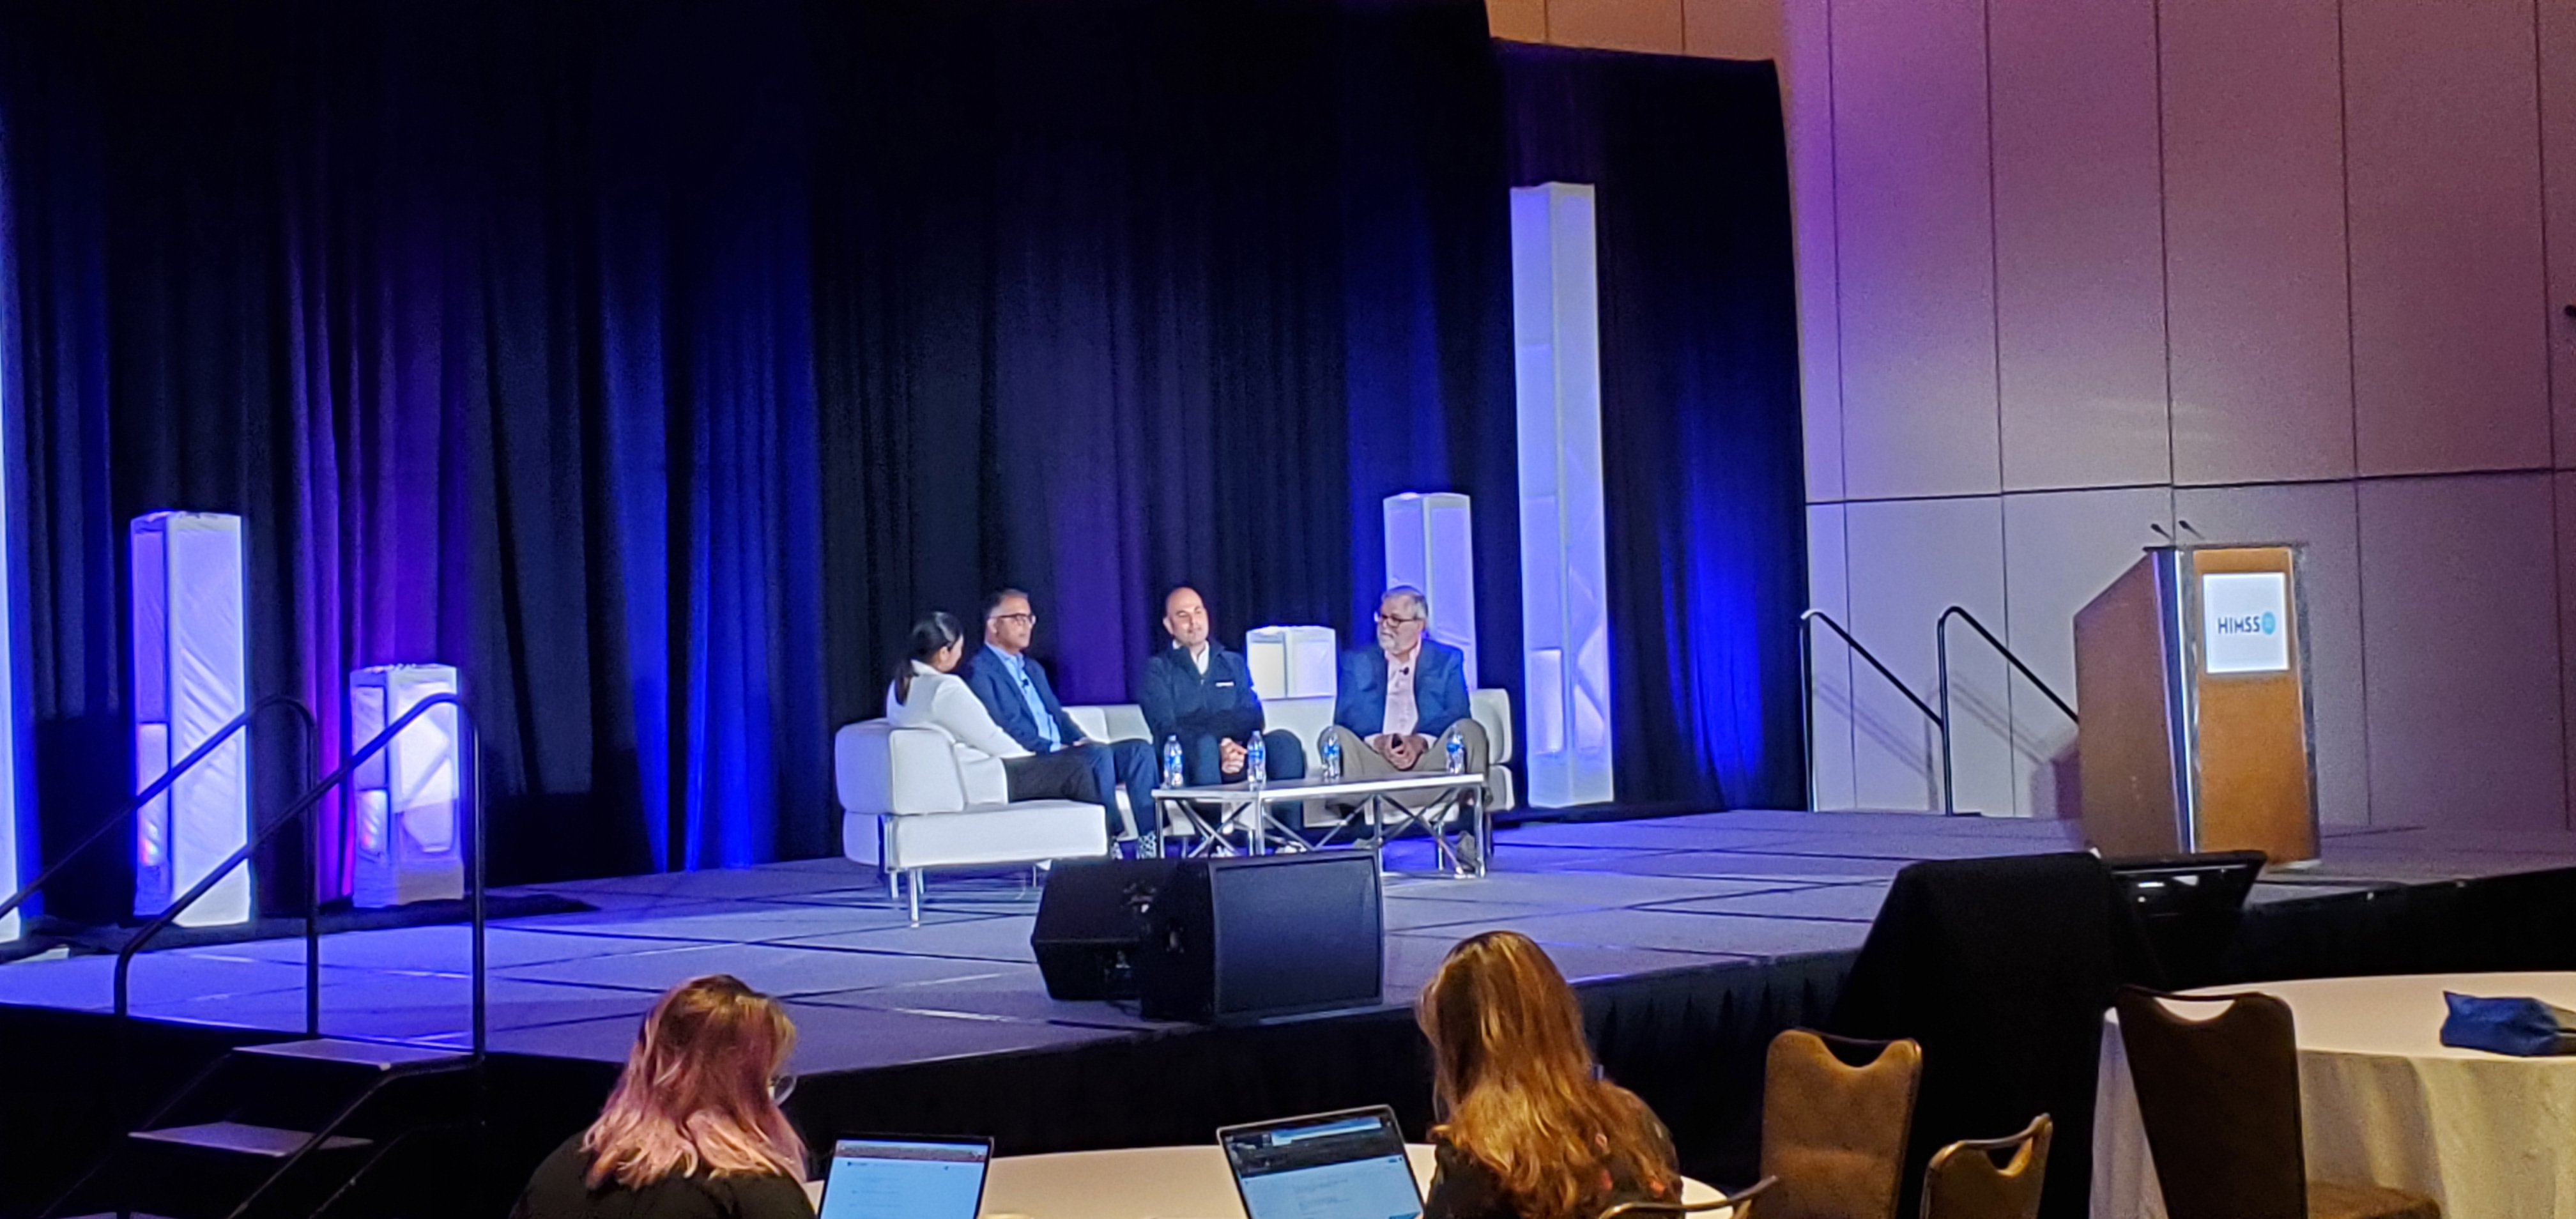 Retail and primary care executives speak on stage at HIMSS 2022